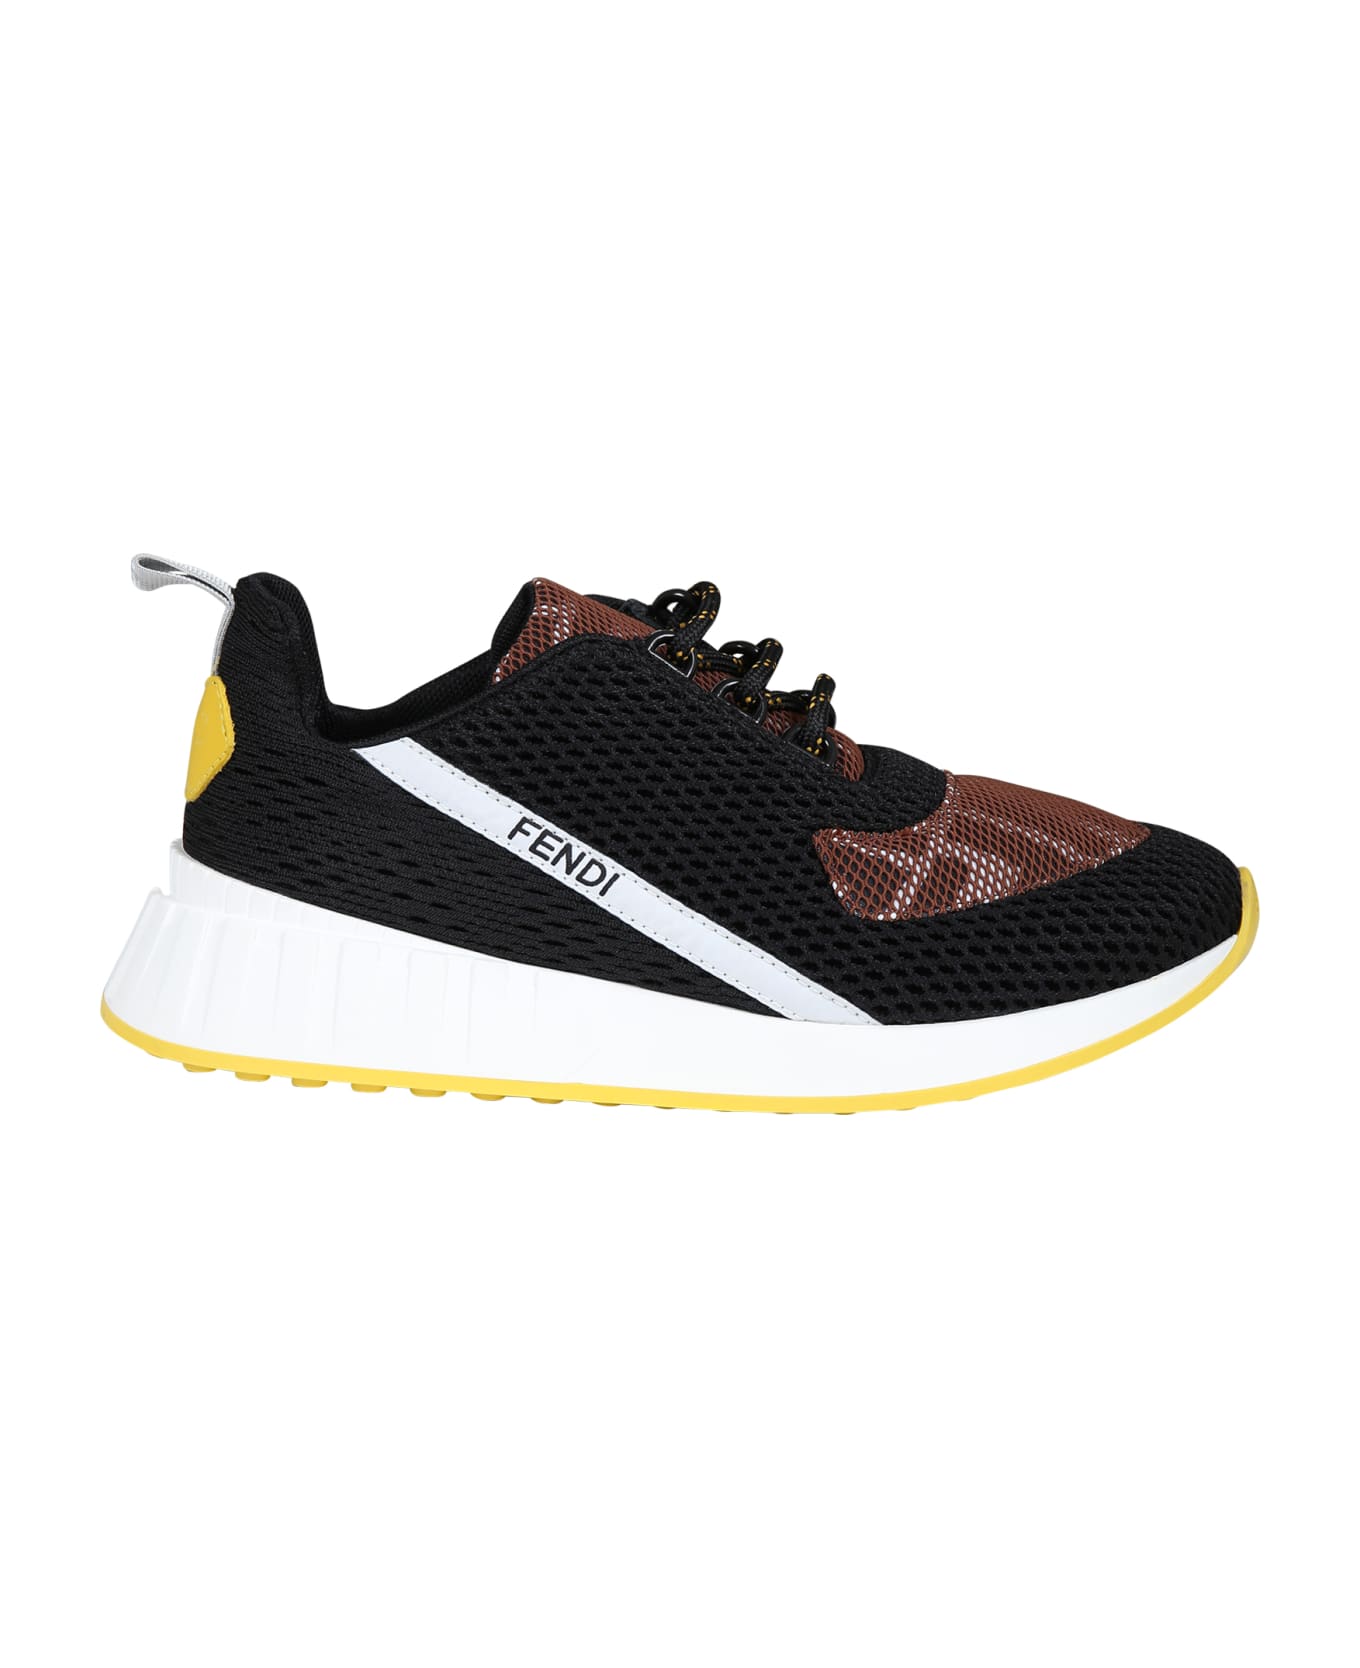 Fendi Black Sneakers For Kids With Iconic Double F - Multicolor